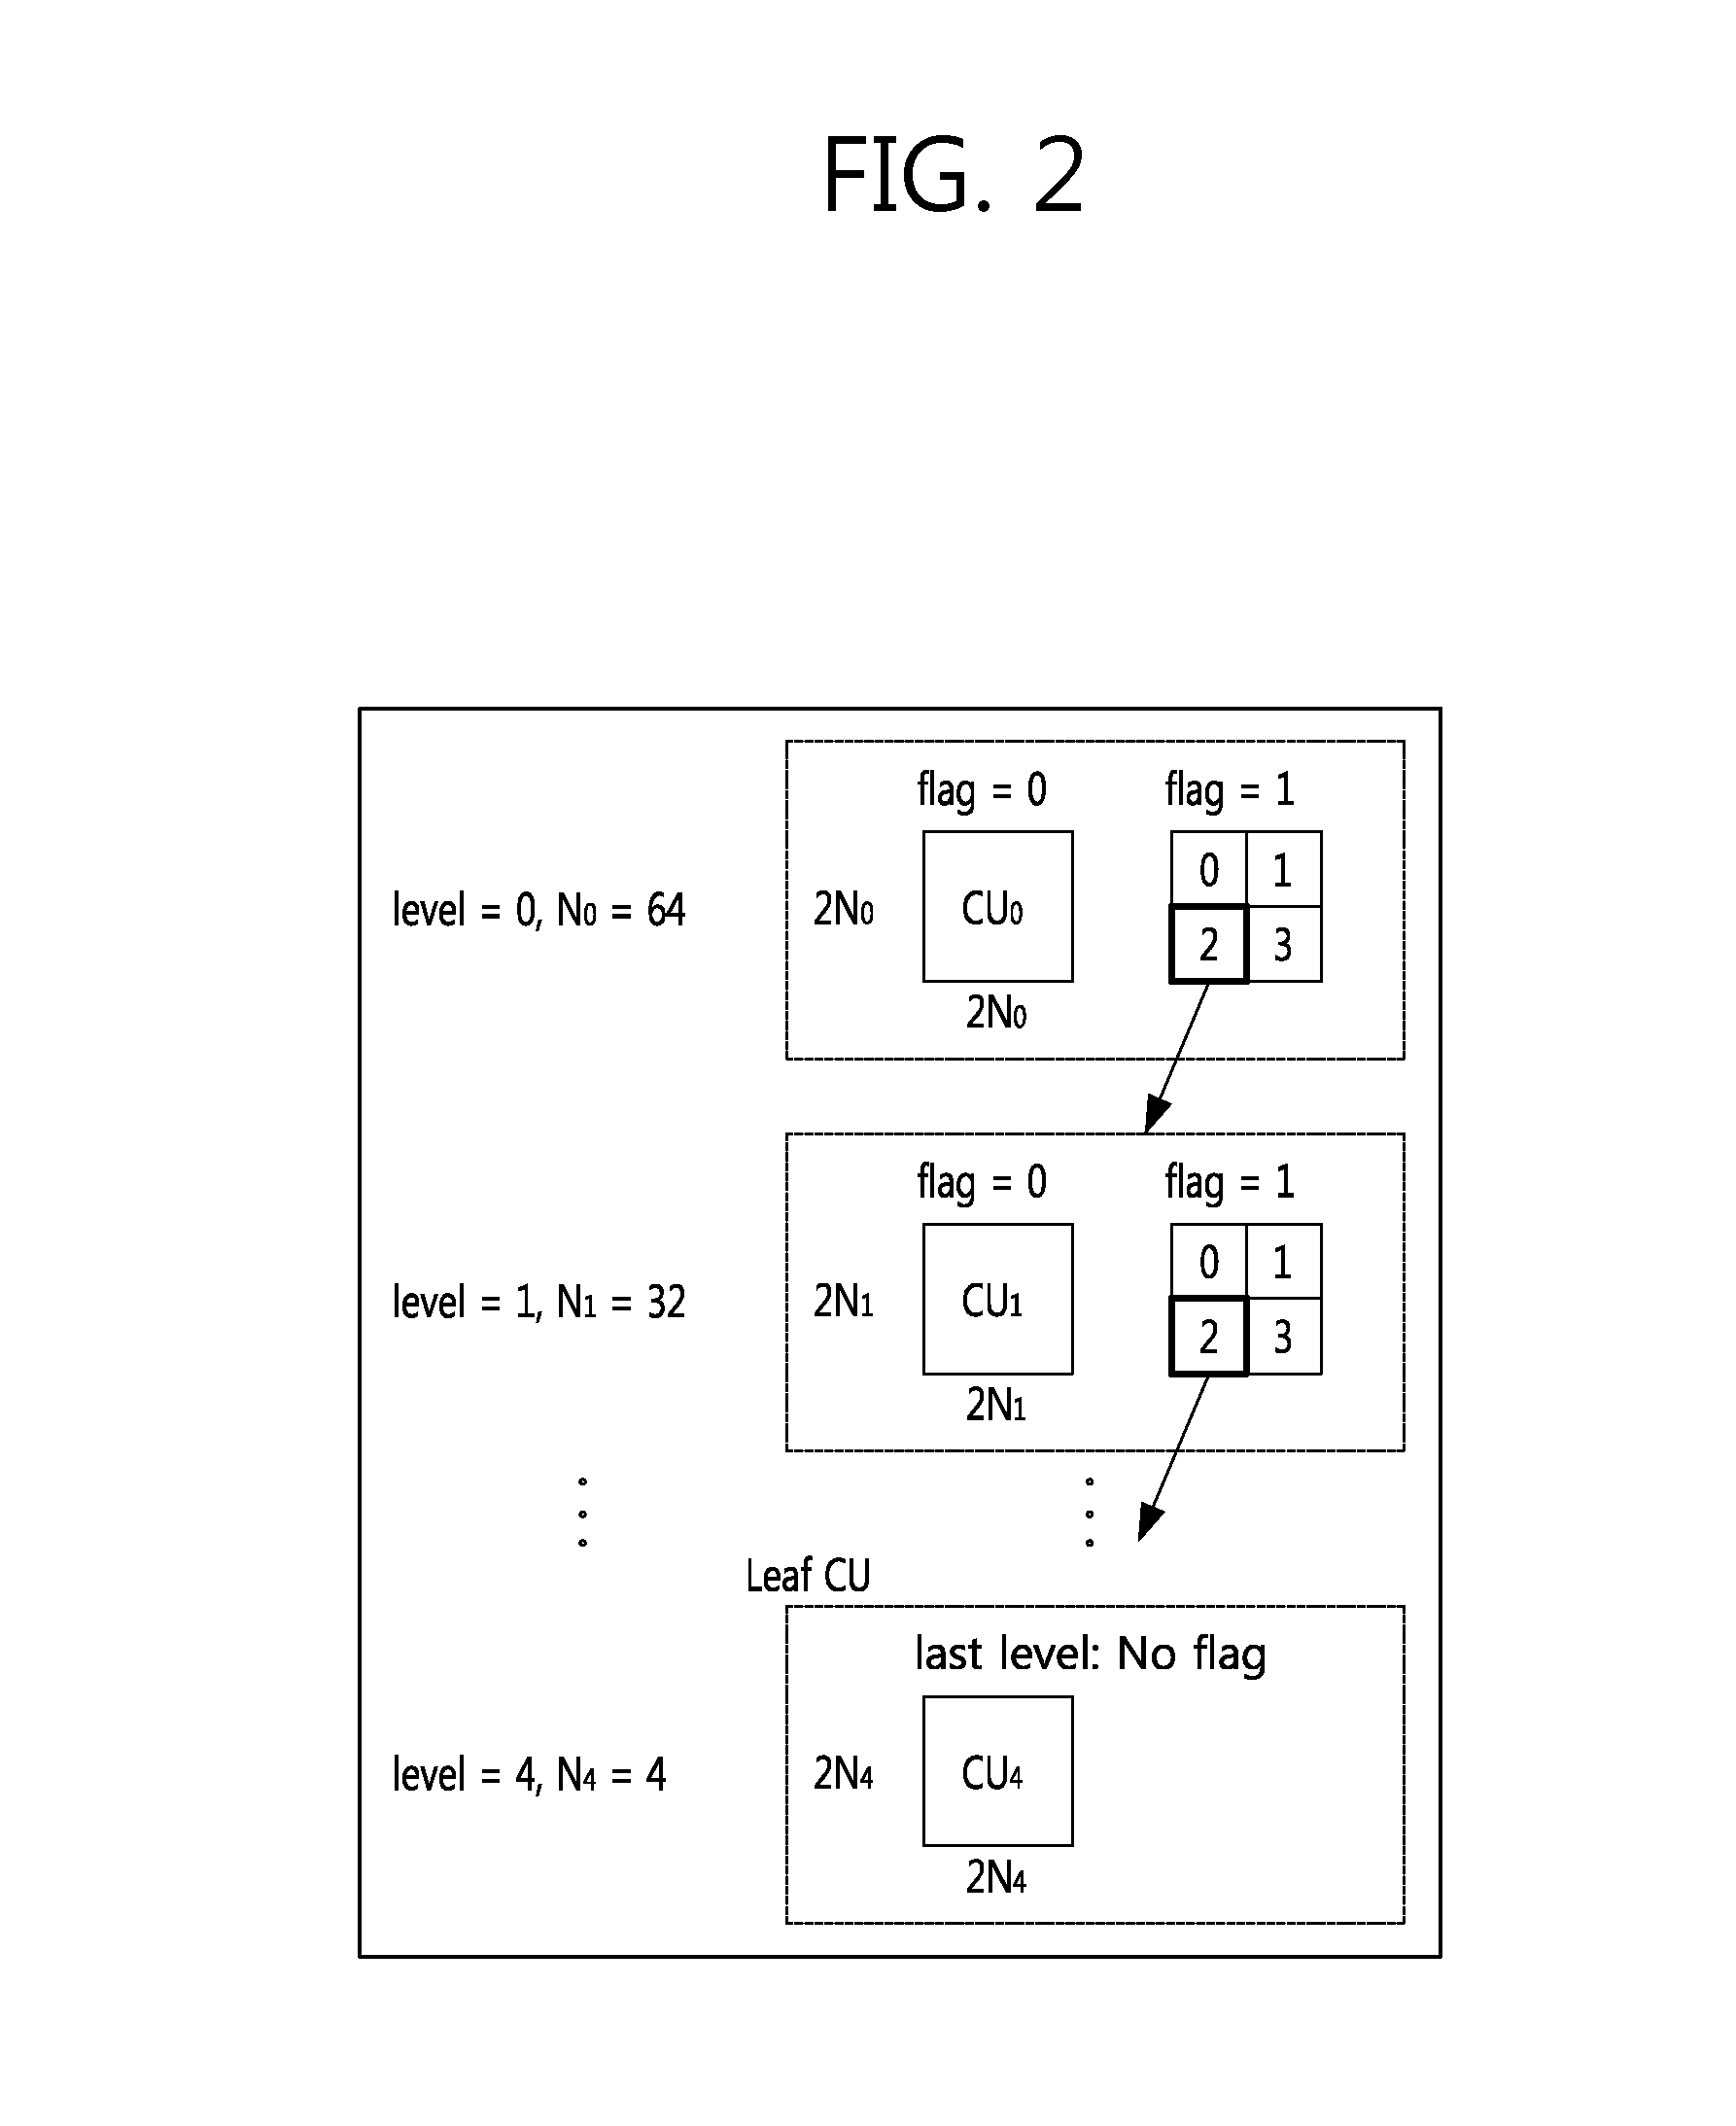 Method for encoding/decoding high-resolution image and device for performing same